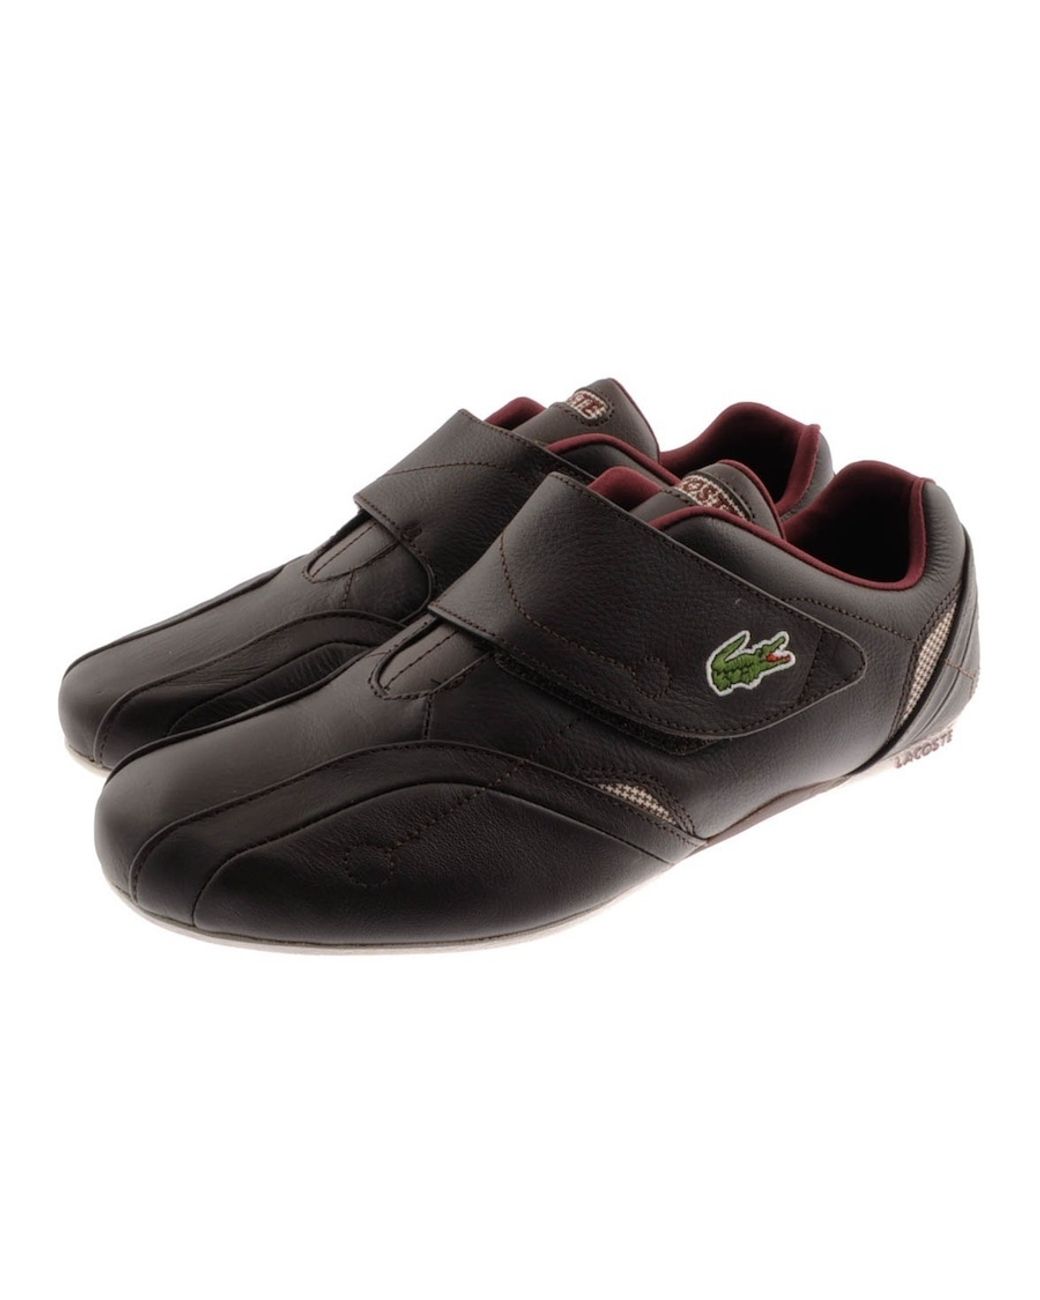 Lacoste Protect Leather Trainers in for Men Lyst UK